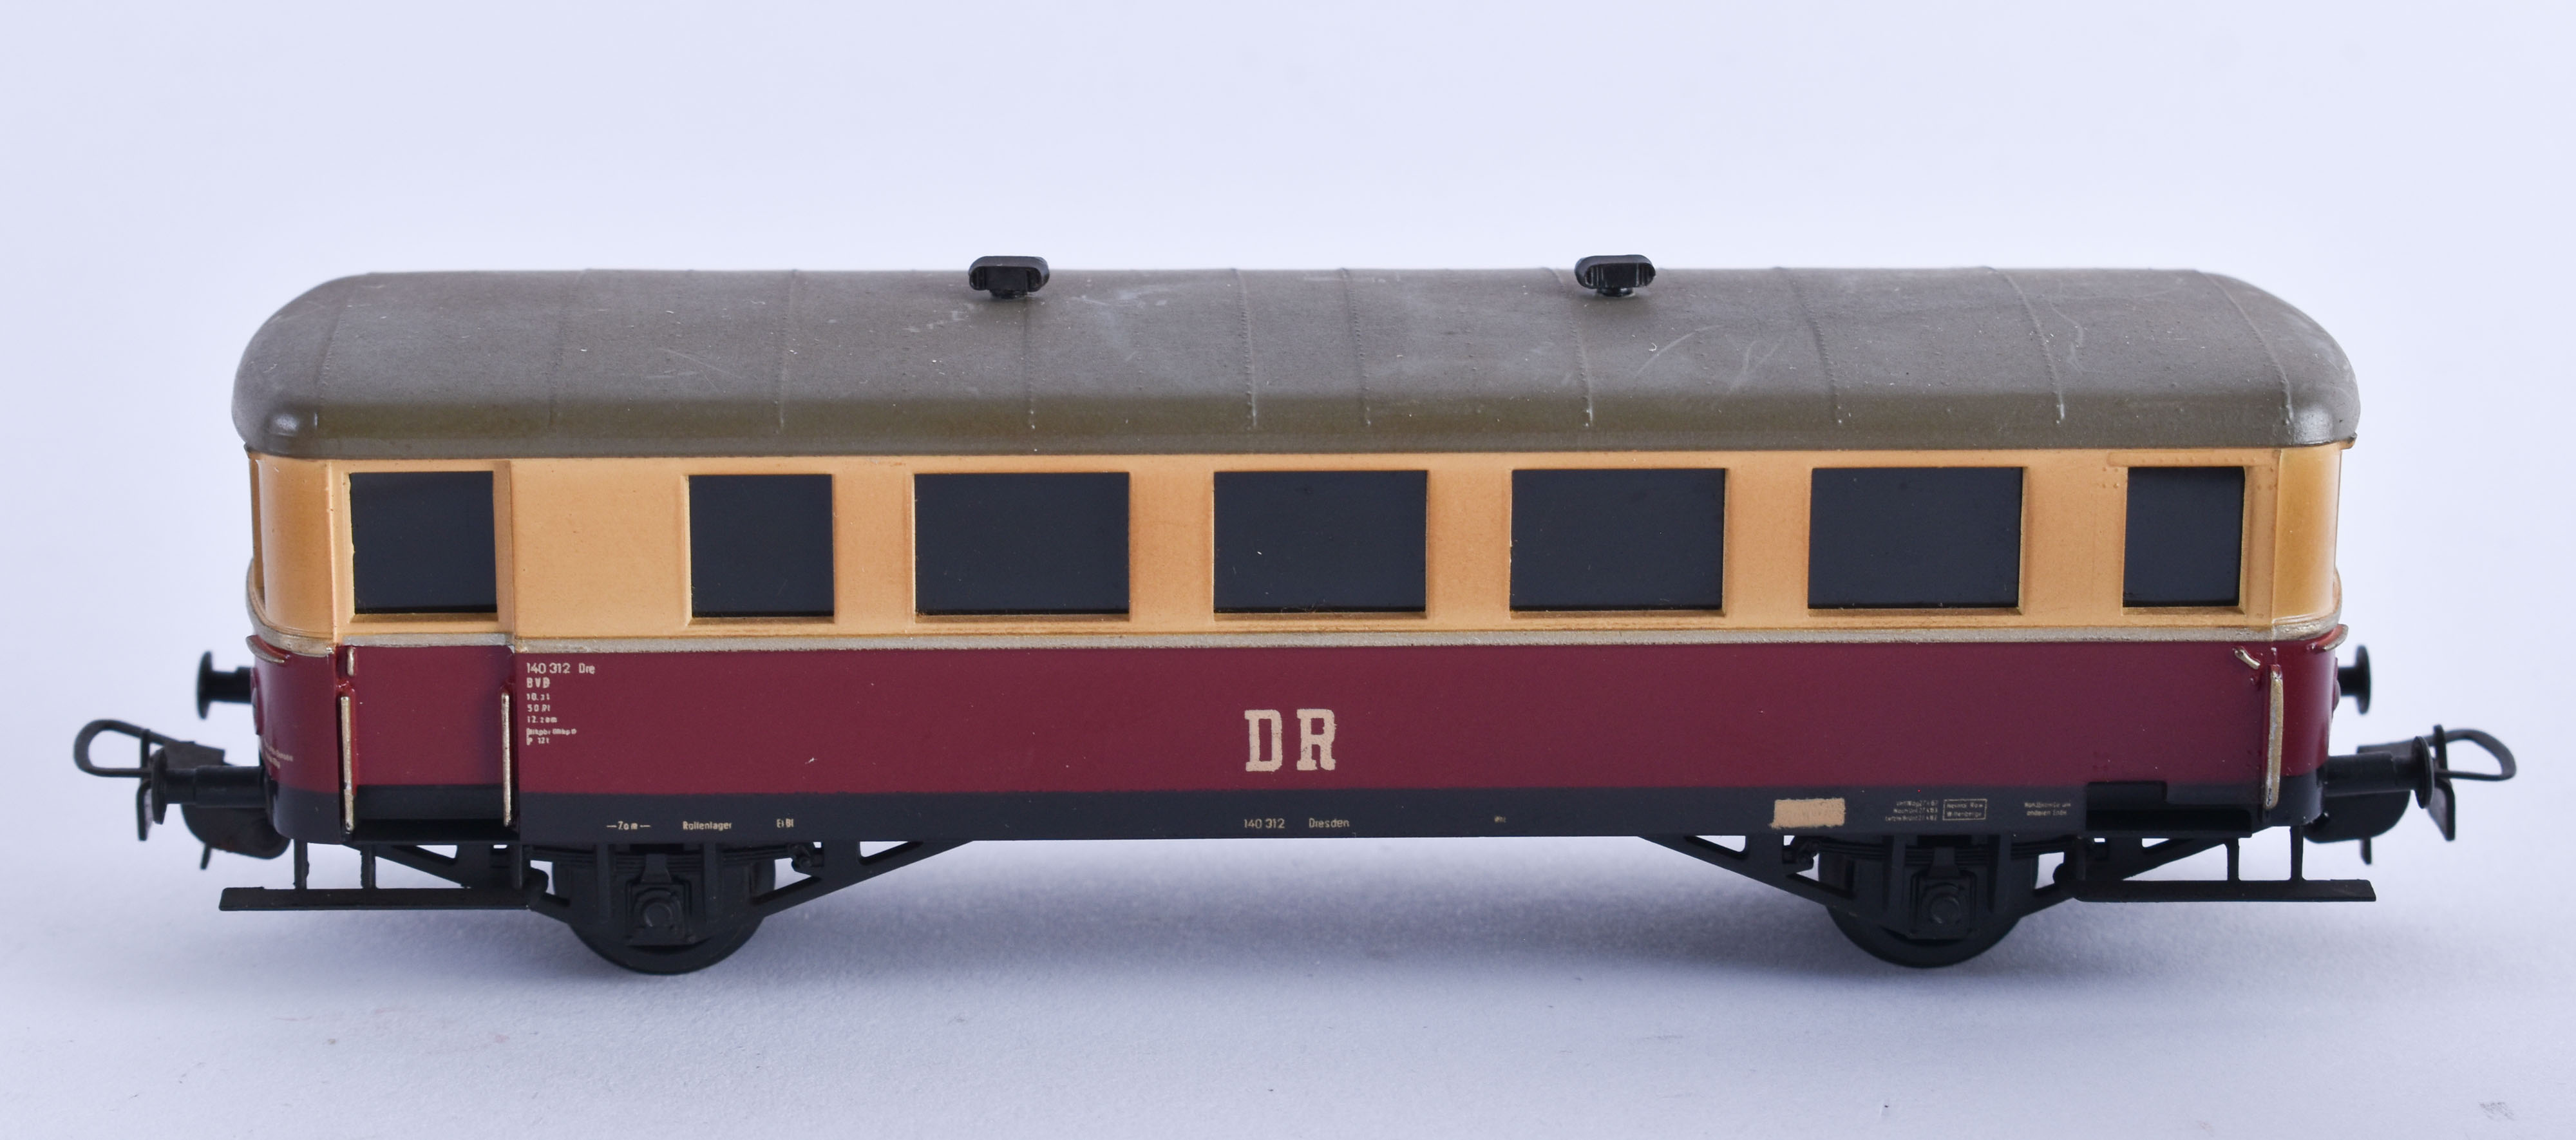 PIKO model of the VT 135 062 with 2 side wagons probably 1963 - Image 2 of 2